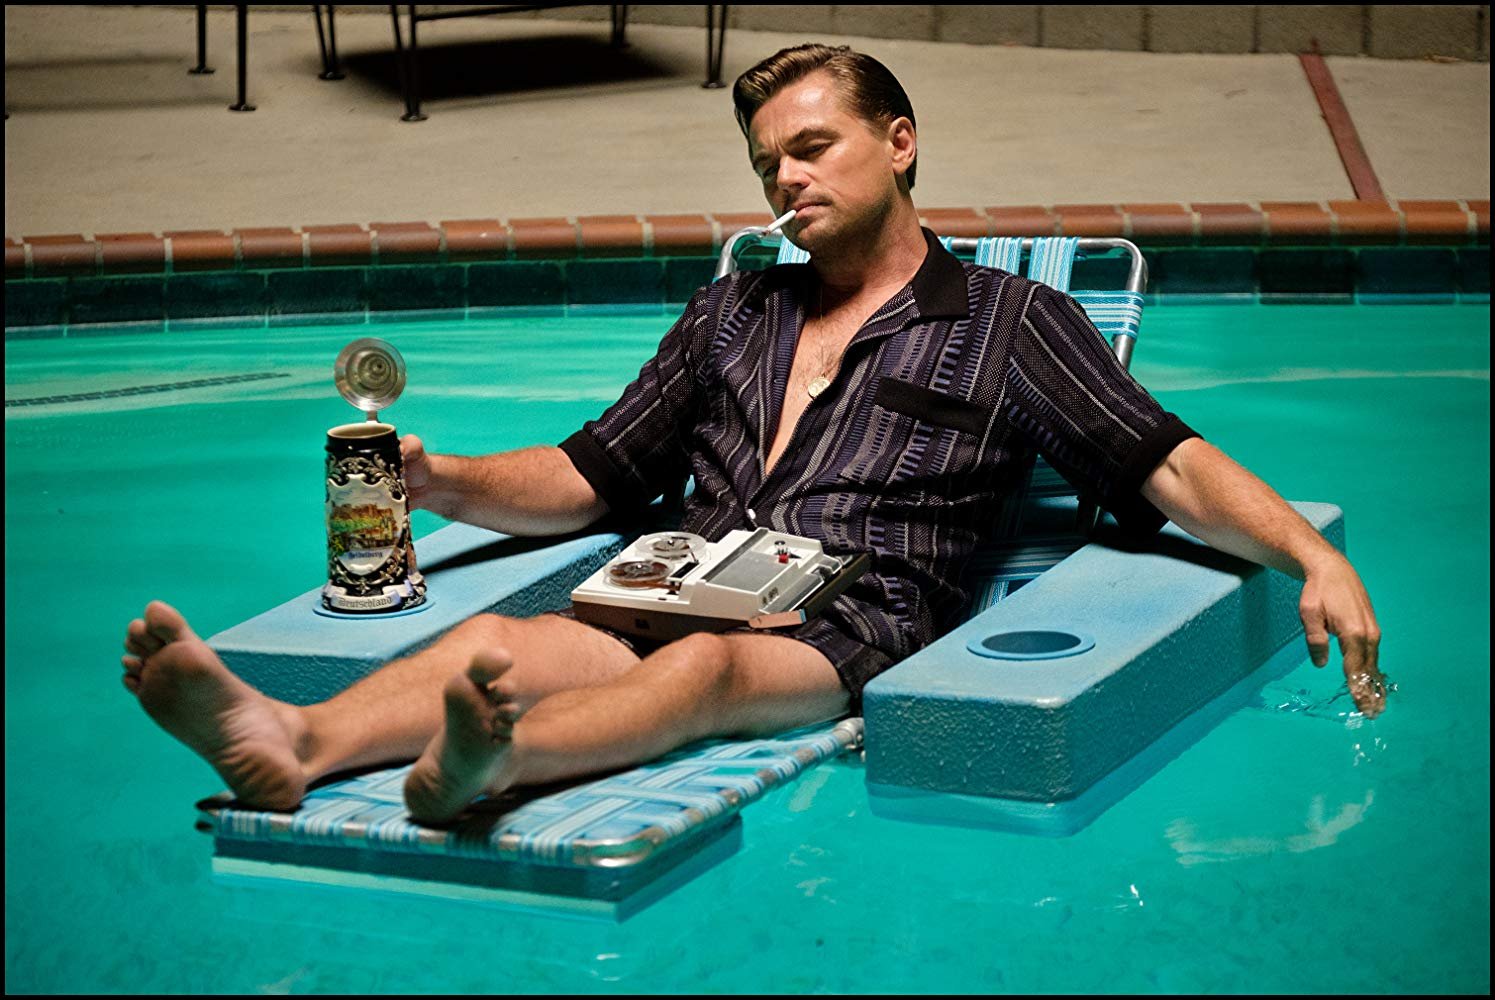 once-upon-a-time-in-hollywood-leonardo-dicaprio.jpg